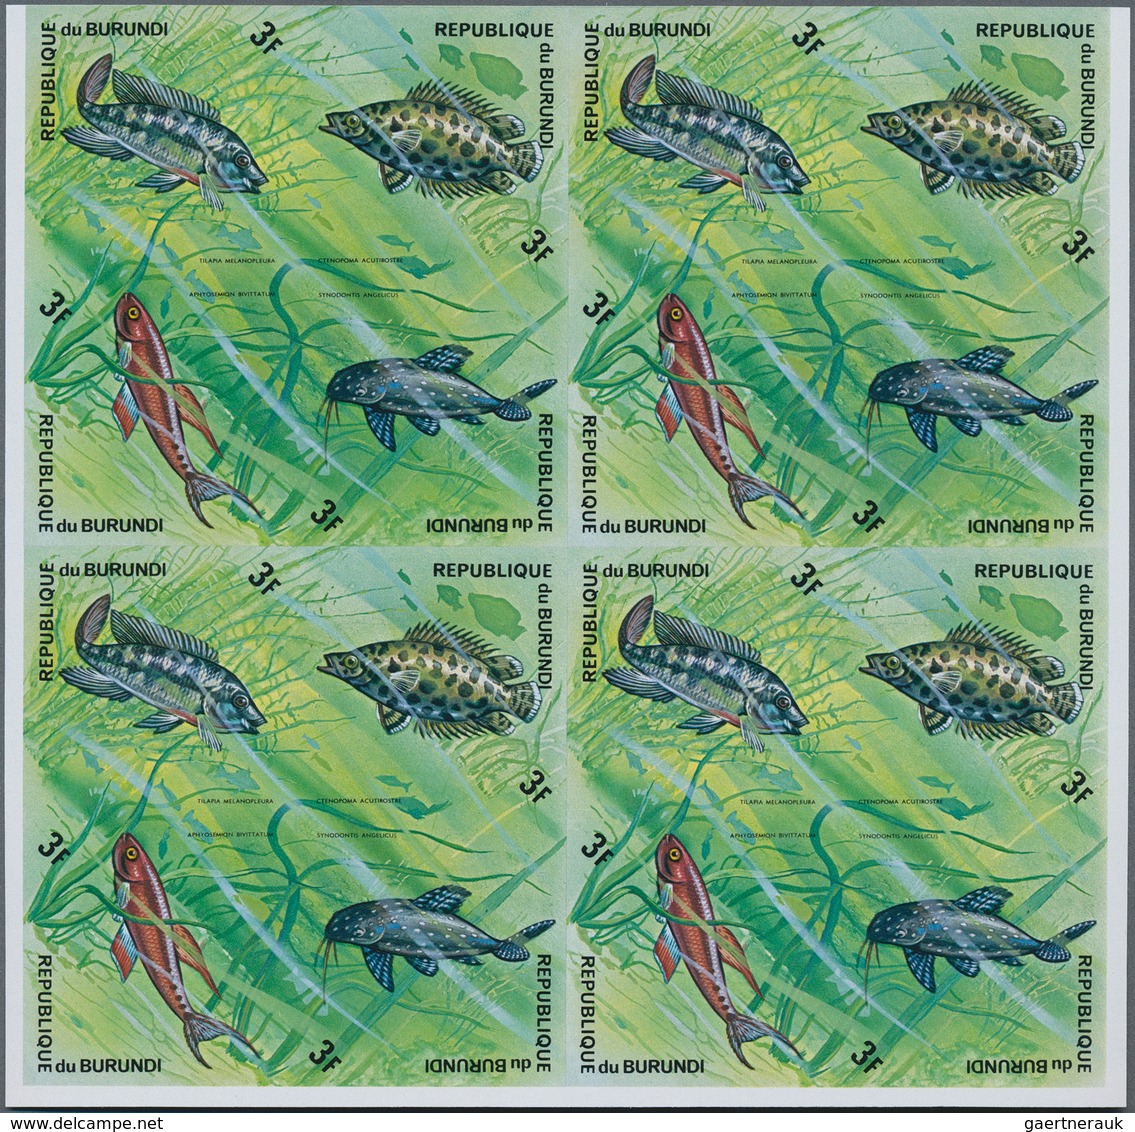 Burundi: 1970/1992. Lot of 9,895 IMPERFORATE stamps, souvenir and miniature sheets showing various i